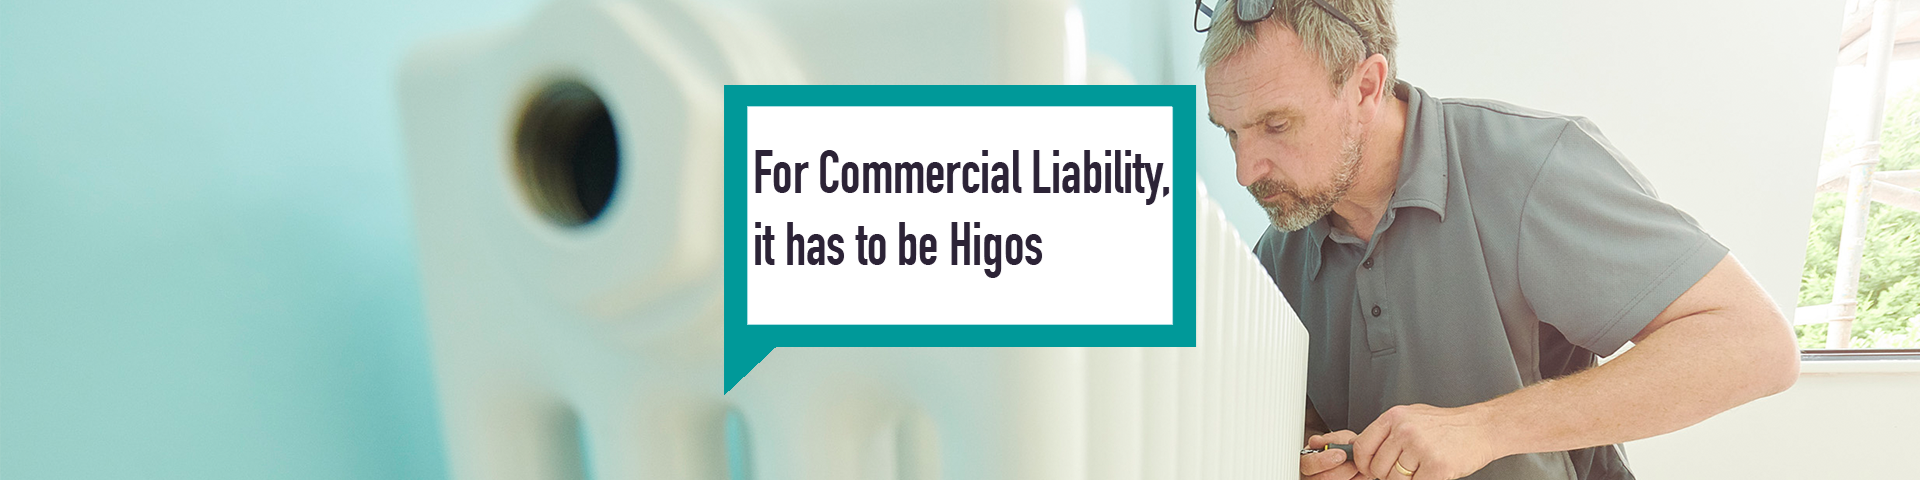 Higos business insurance commercial liability